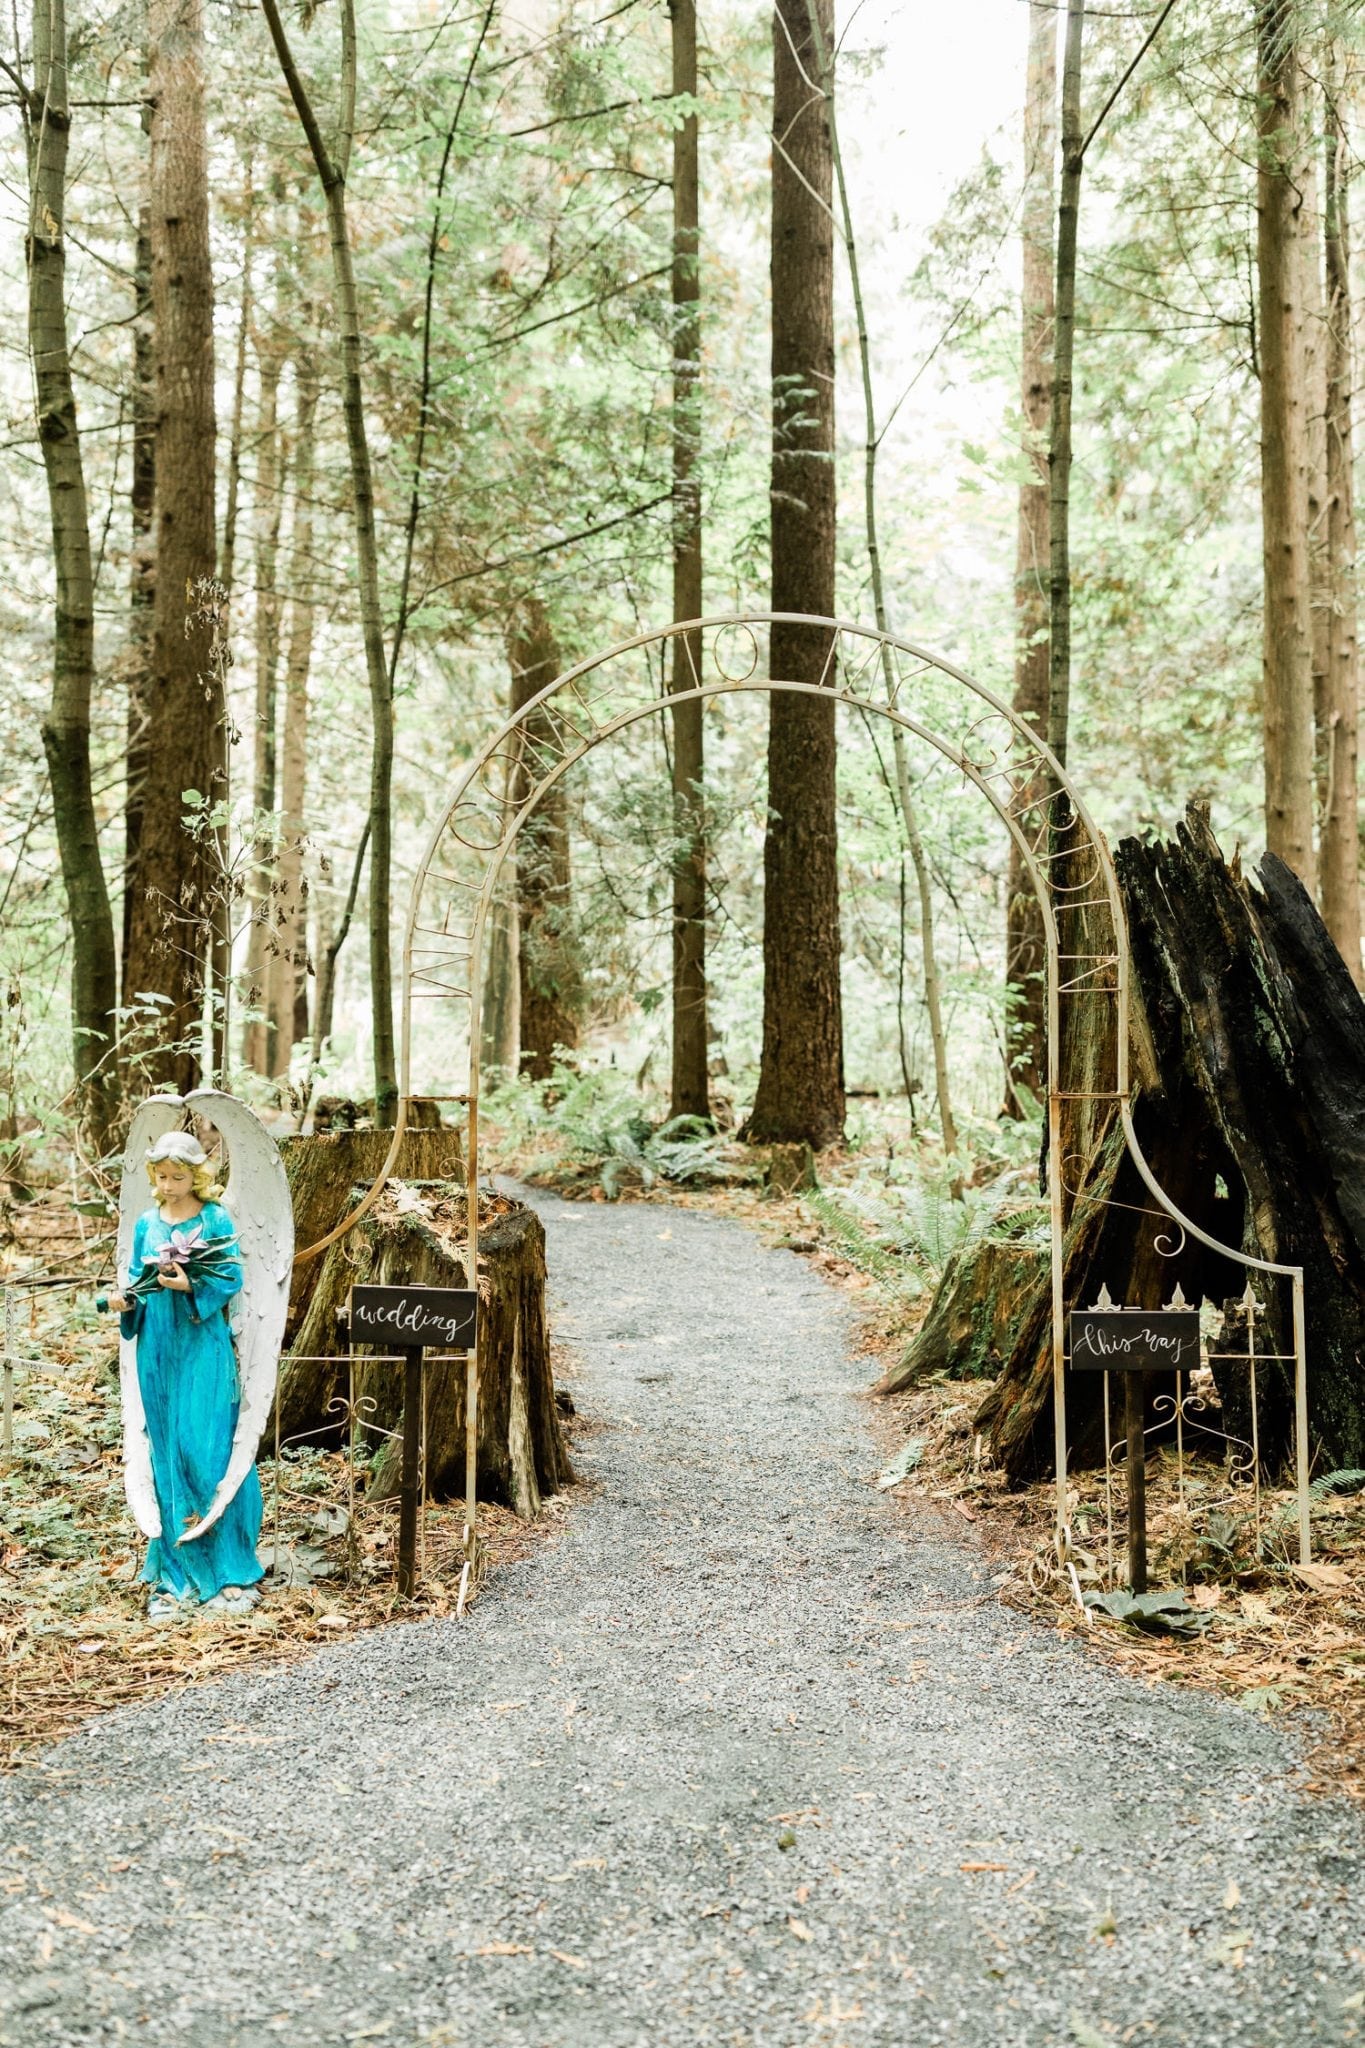 Rustic arch decoration in the woods | Vancouver wedding photographer